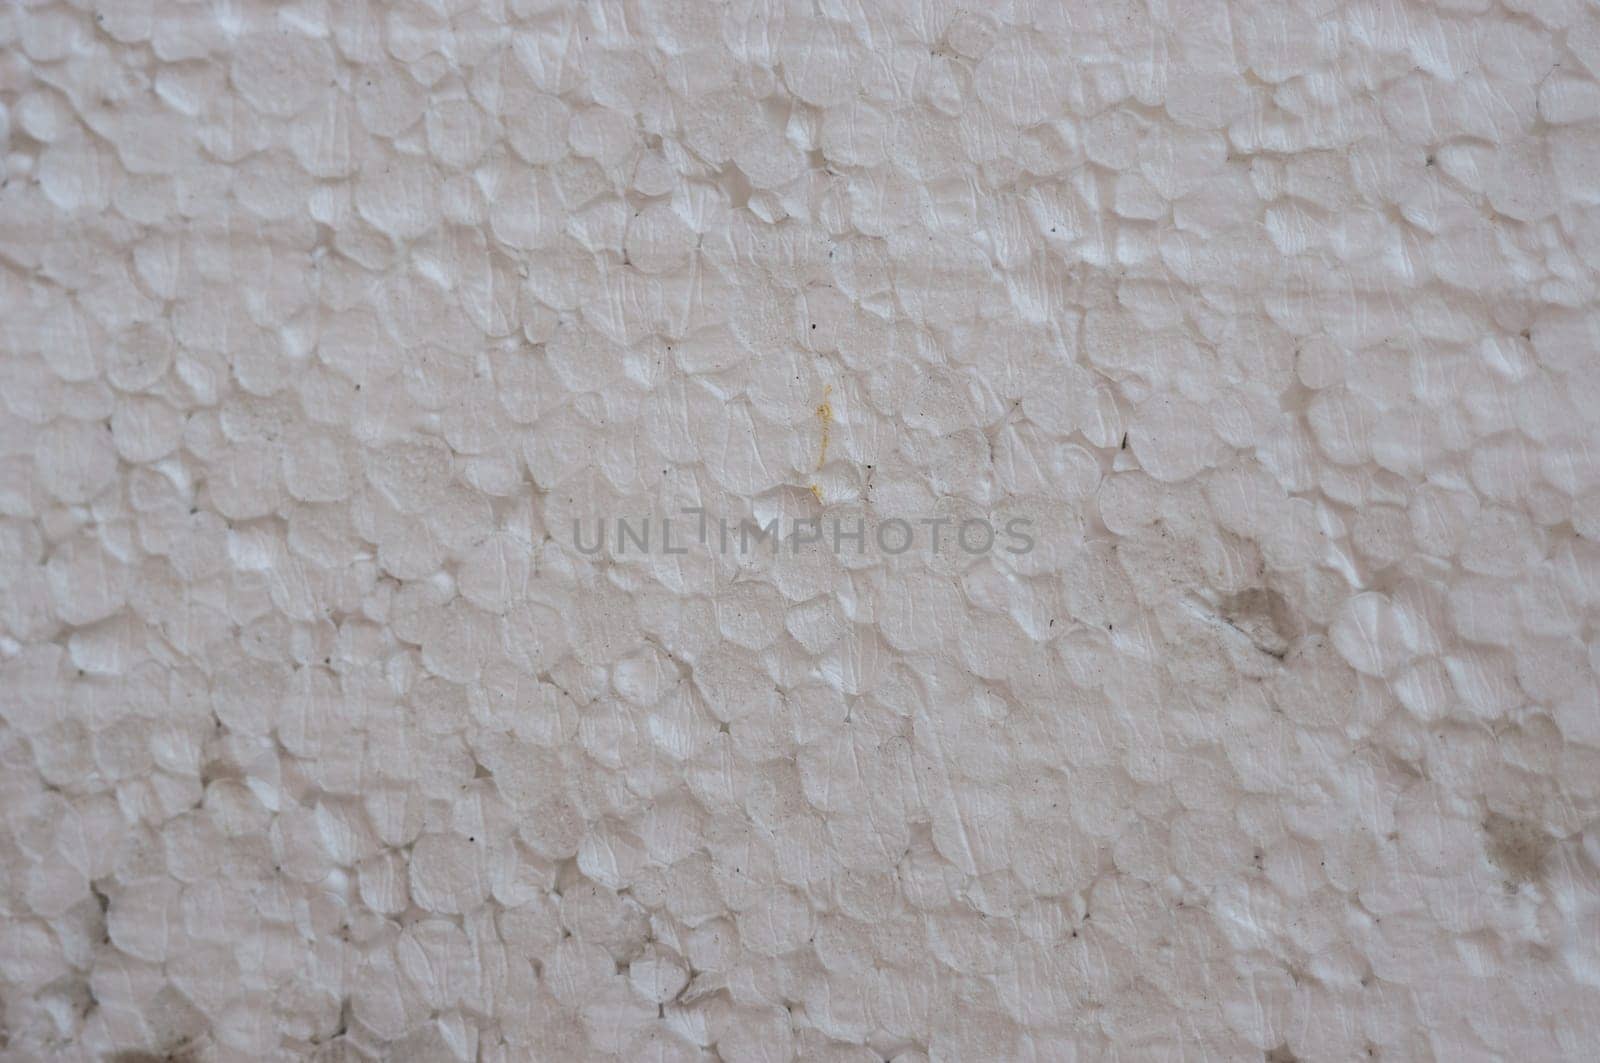 A white foam wall with a pattern of small white circles. The wall is covered in foam and has a rough texture